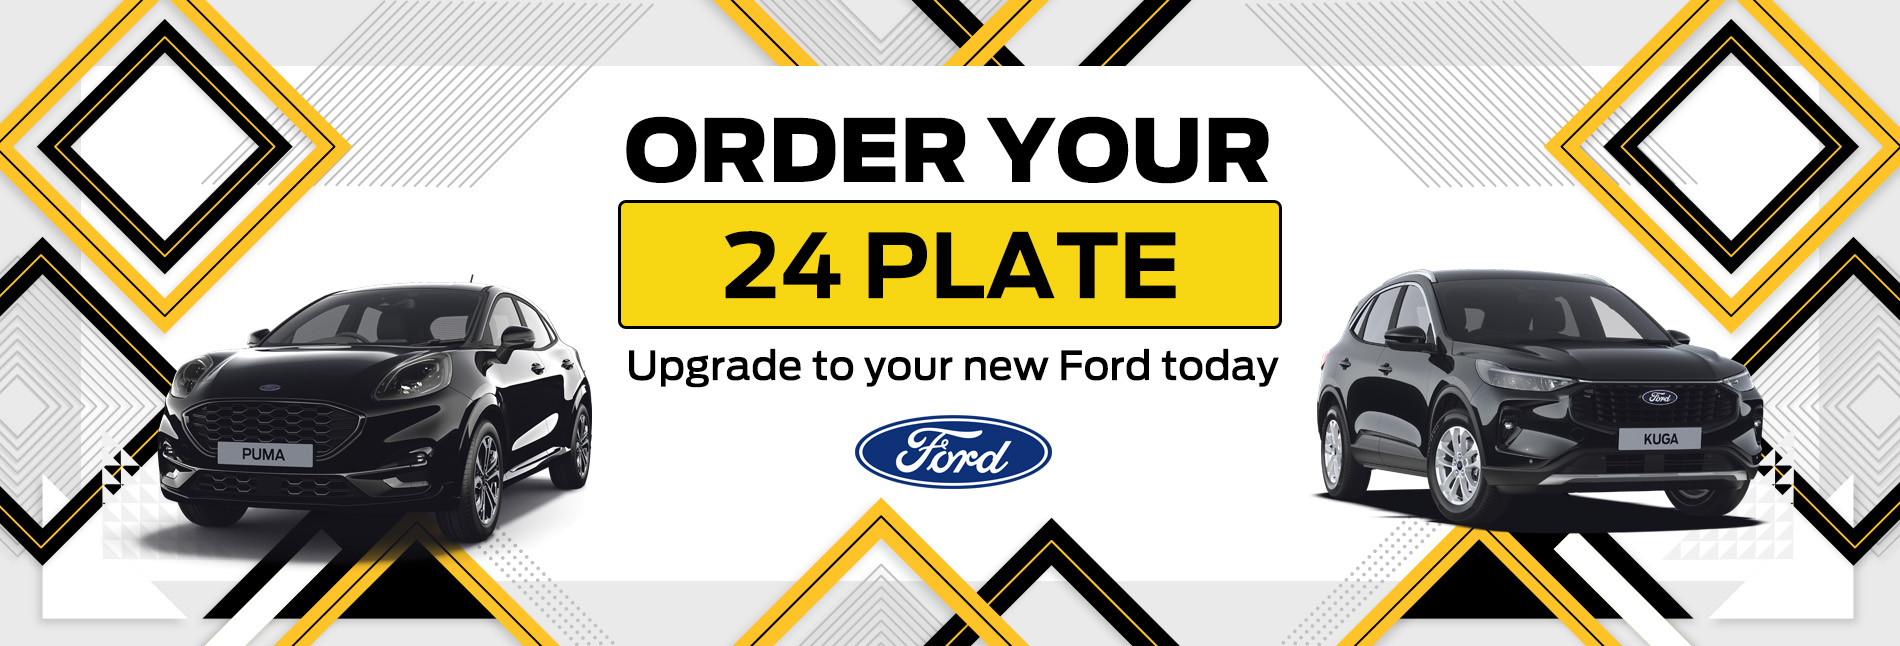 Order your 24 Plate Now